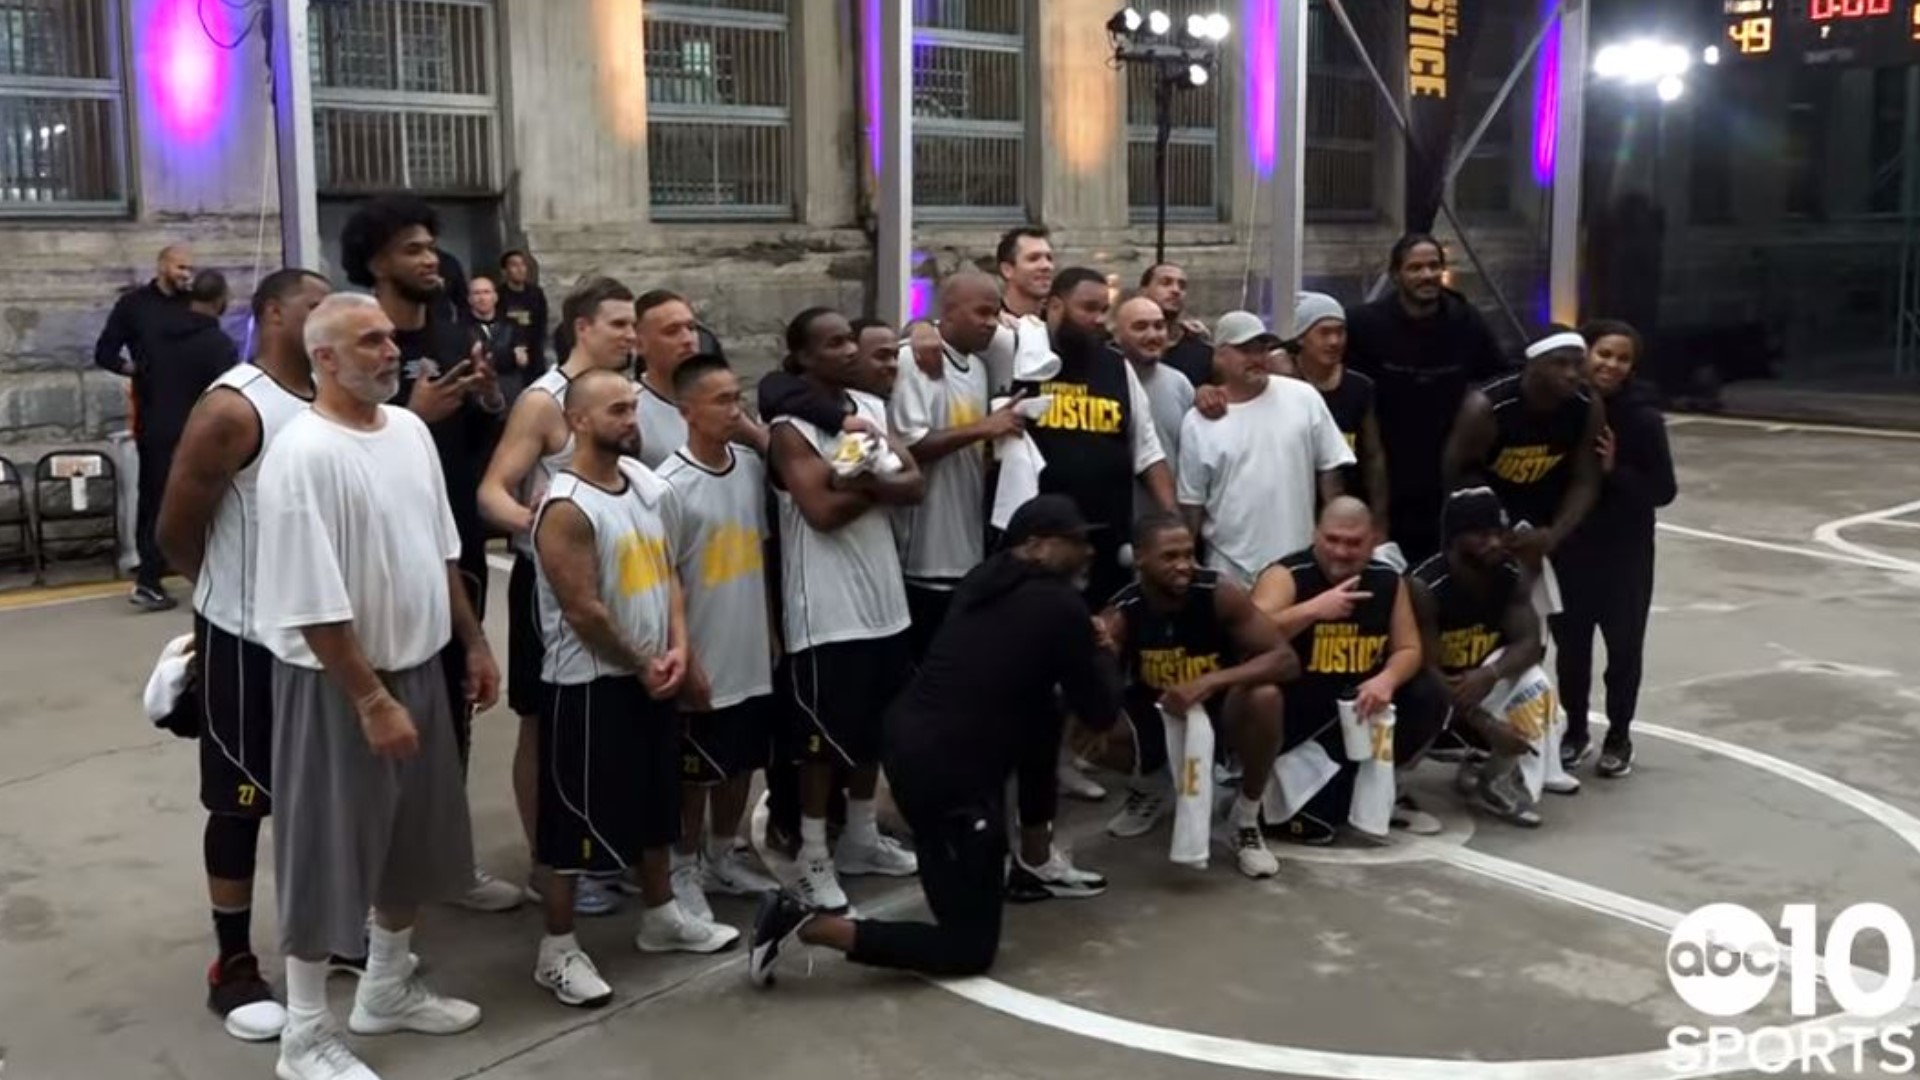 The Sacramento Kings, in partnership with the REPRESENT JUSTICE Campaign, are tipping off a series of NBA teams playing basketball games in correctional facilities